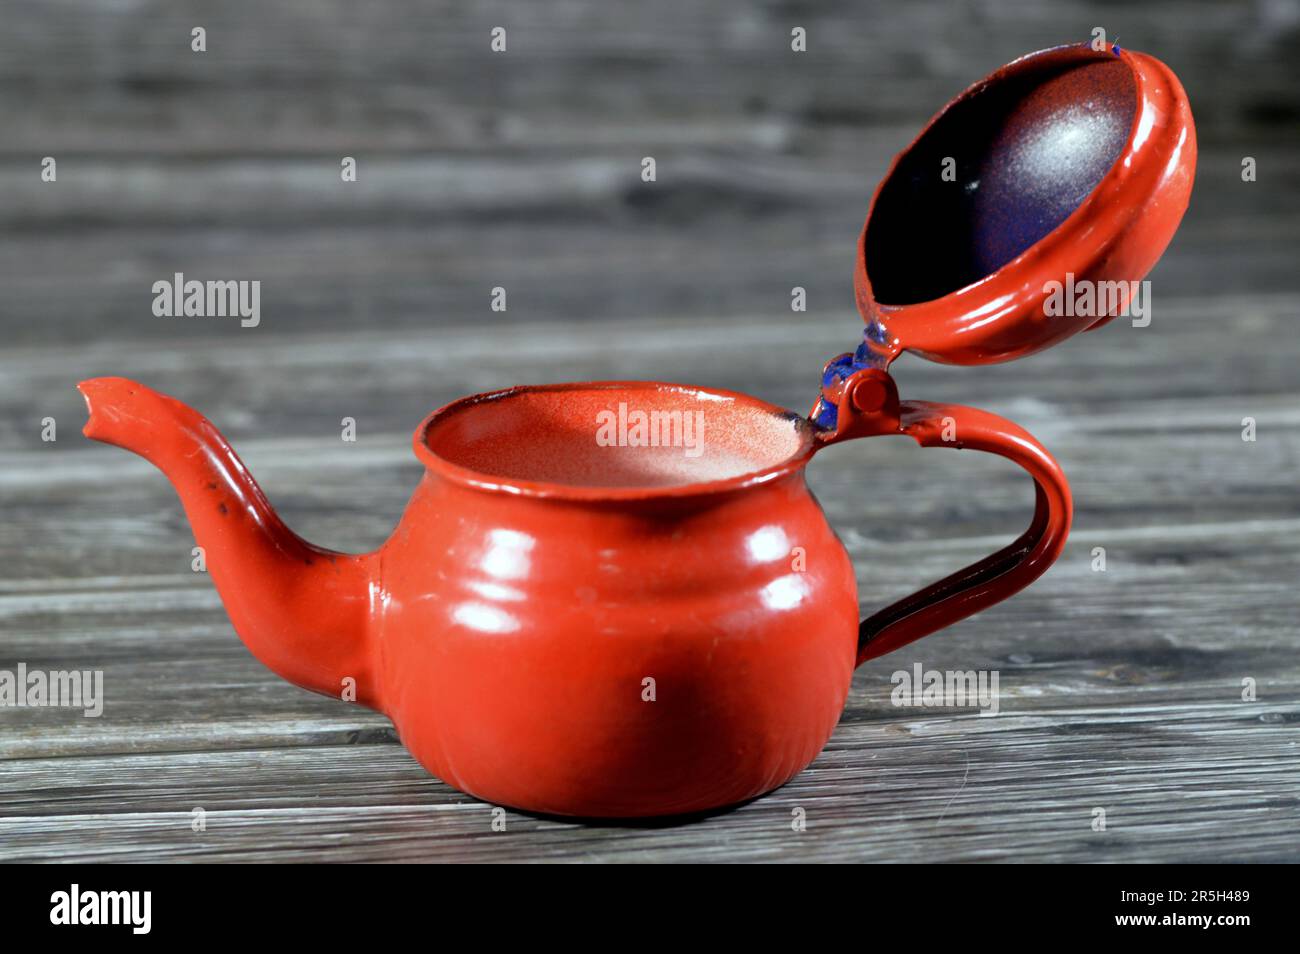 https://c8.alamy.com/comp/2R5H489/a-vintage-retro-old-style-teapot-red-tea-pot-isolated-on-wooden-background-a-container-for-making-and-serving-tea-with-a-handle-and-a-shaped-opening-2R5H489.jpg